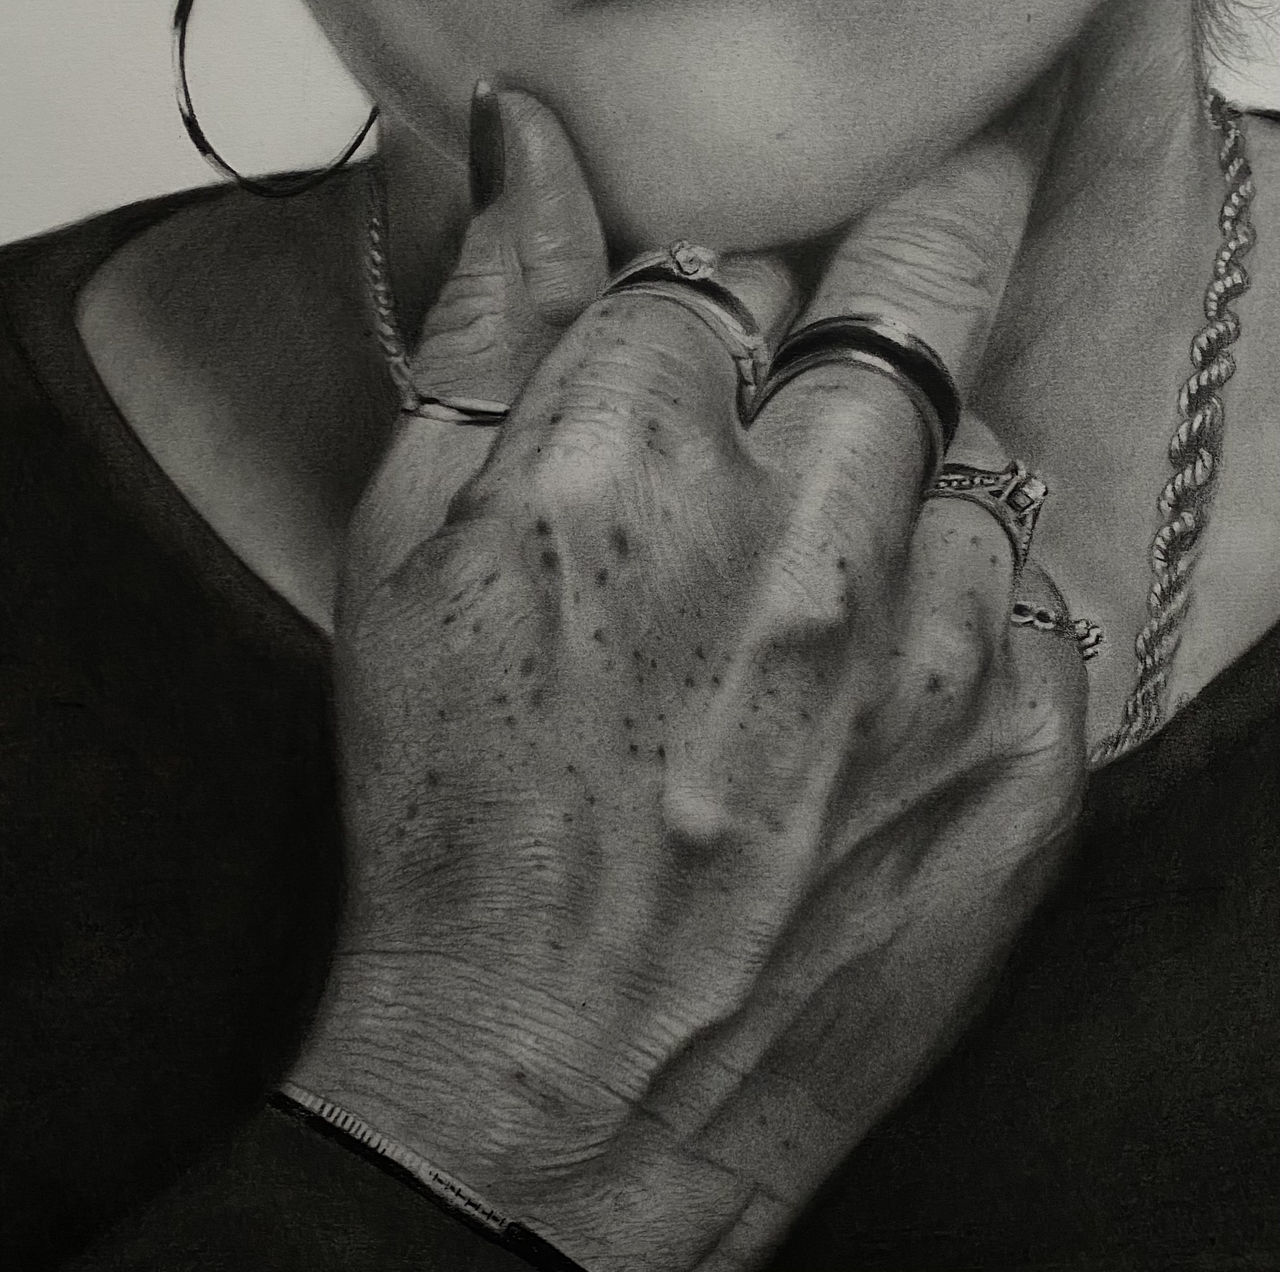 CLOSE-UP OF WOMAN HAND WITH TATTOO ON HANDS